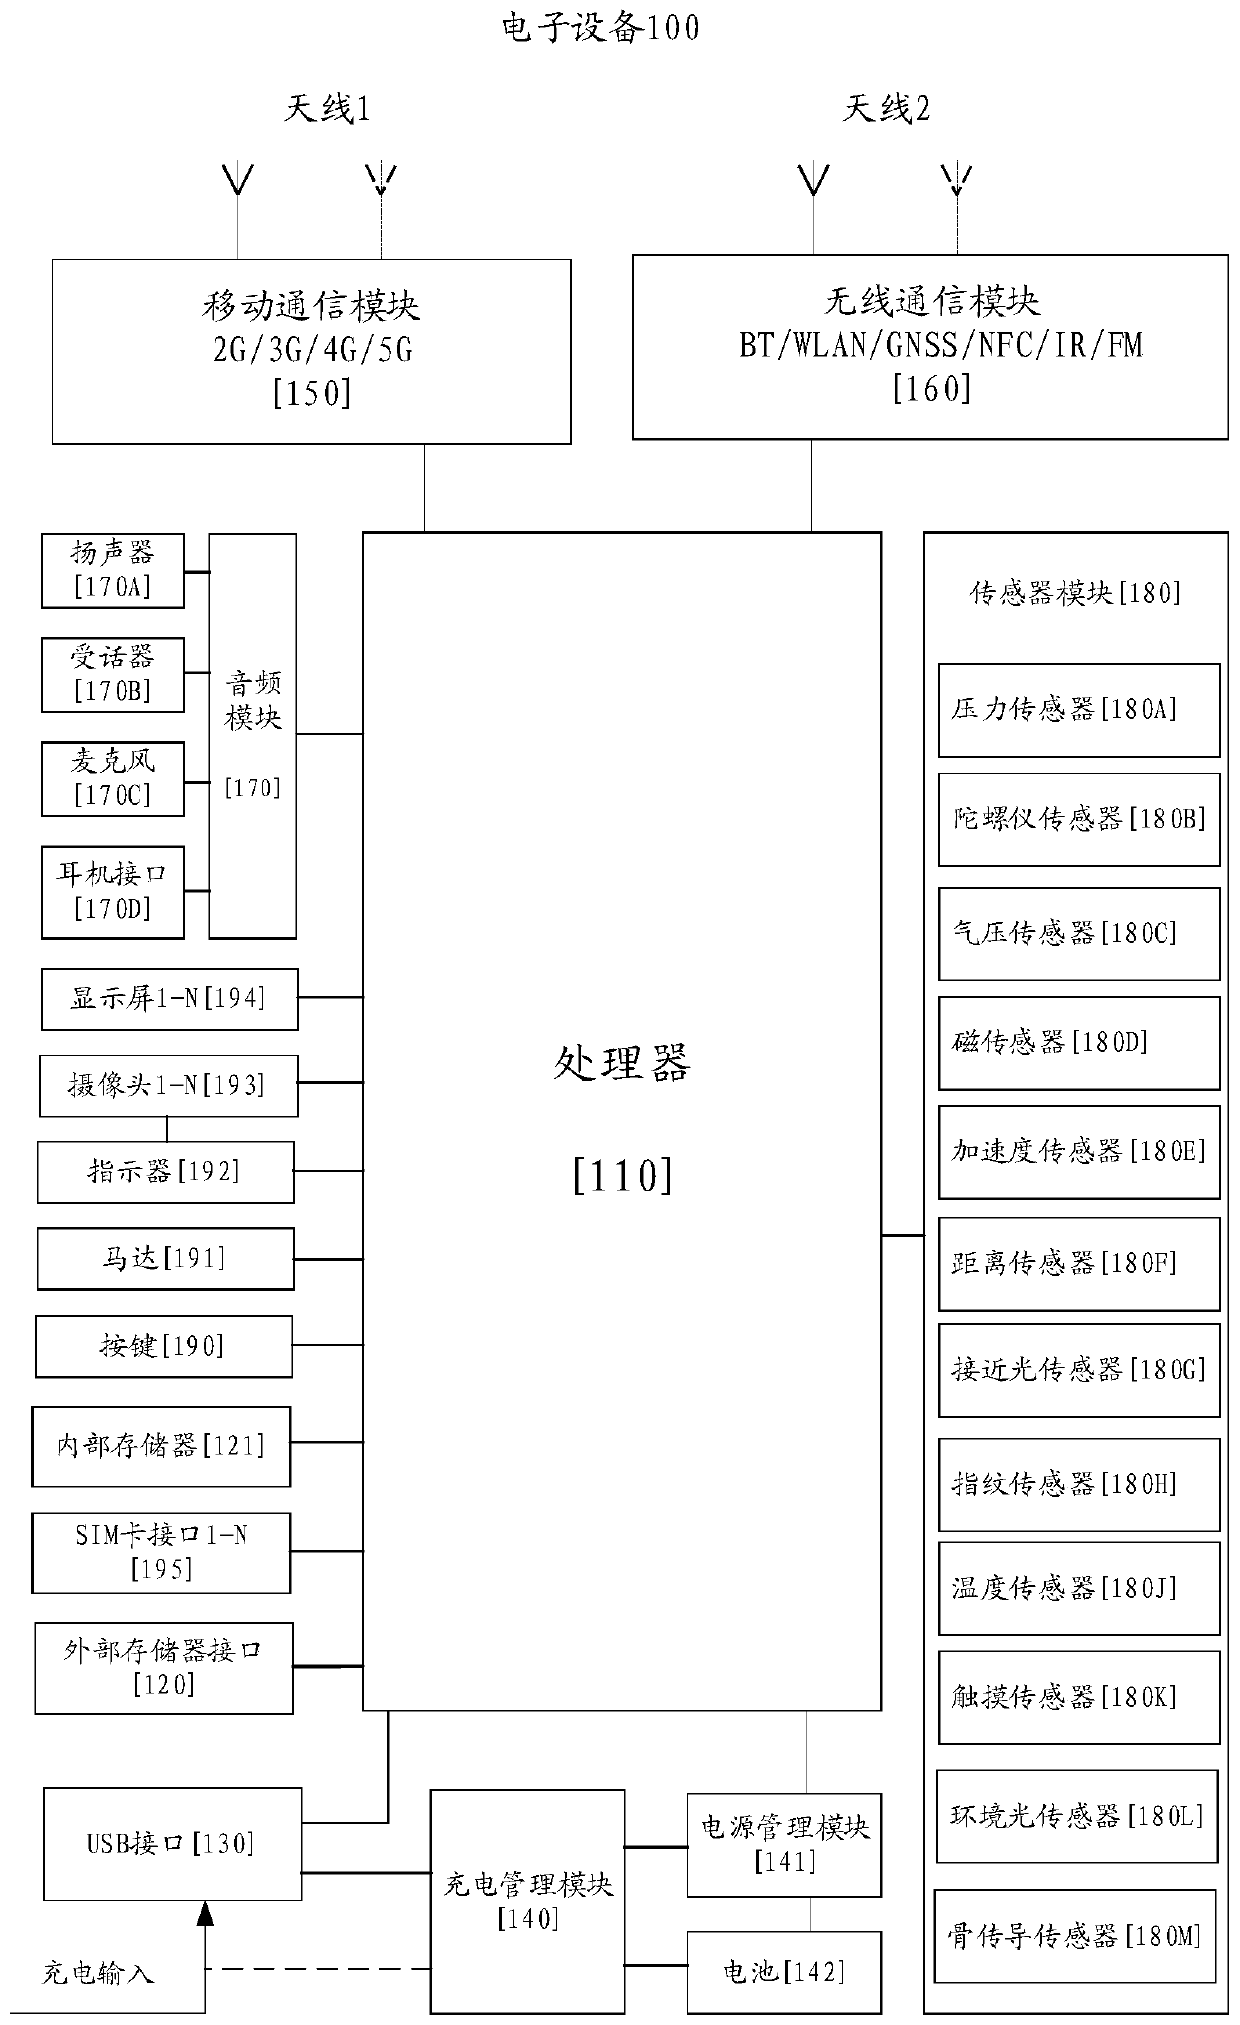 Image capturing method, and electronic device